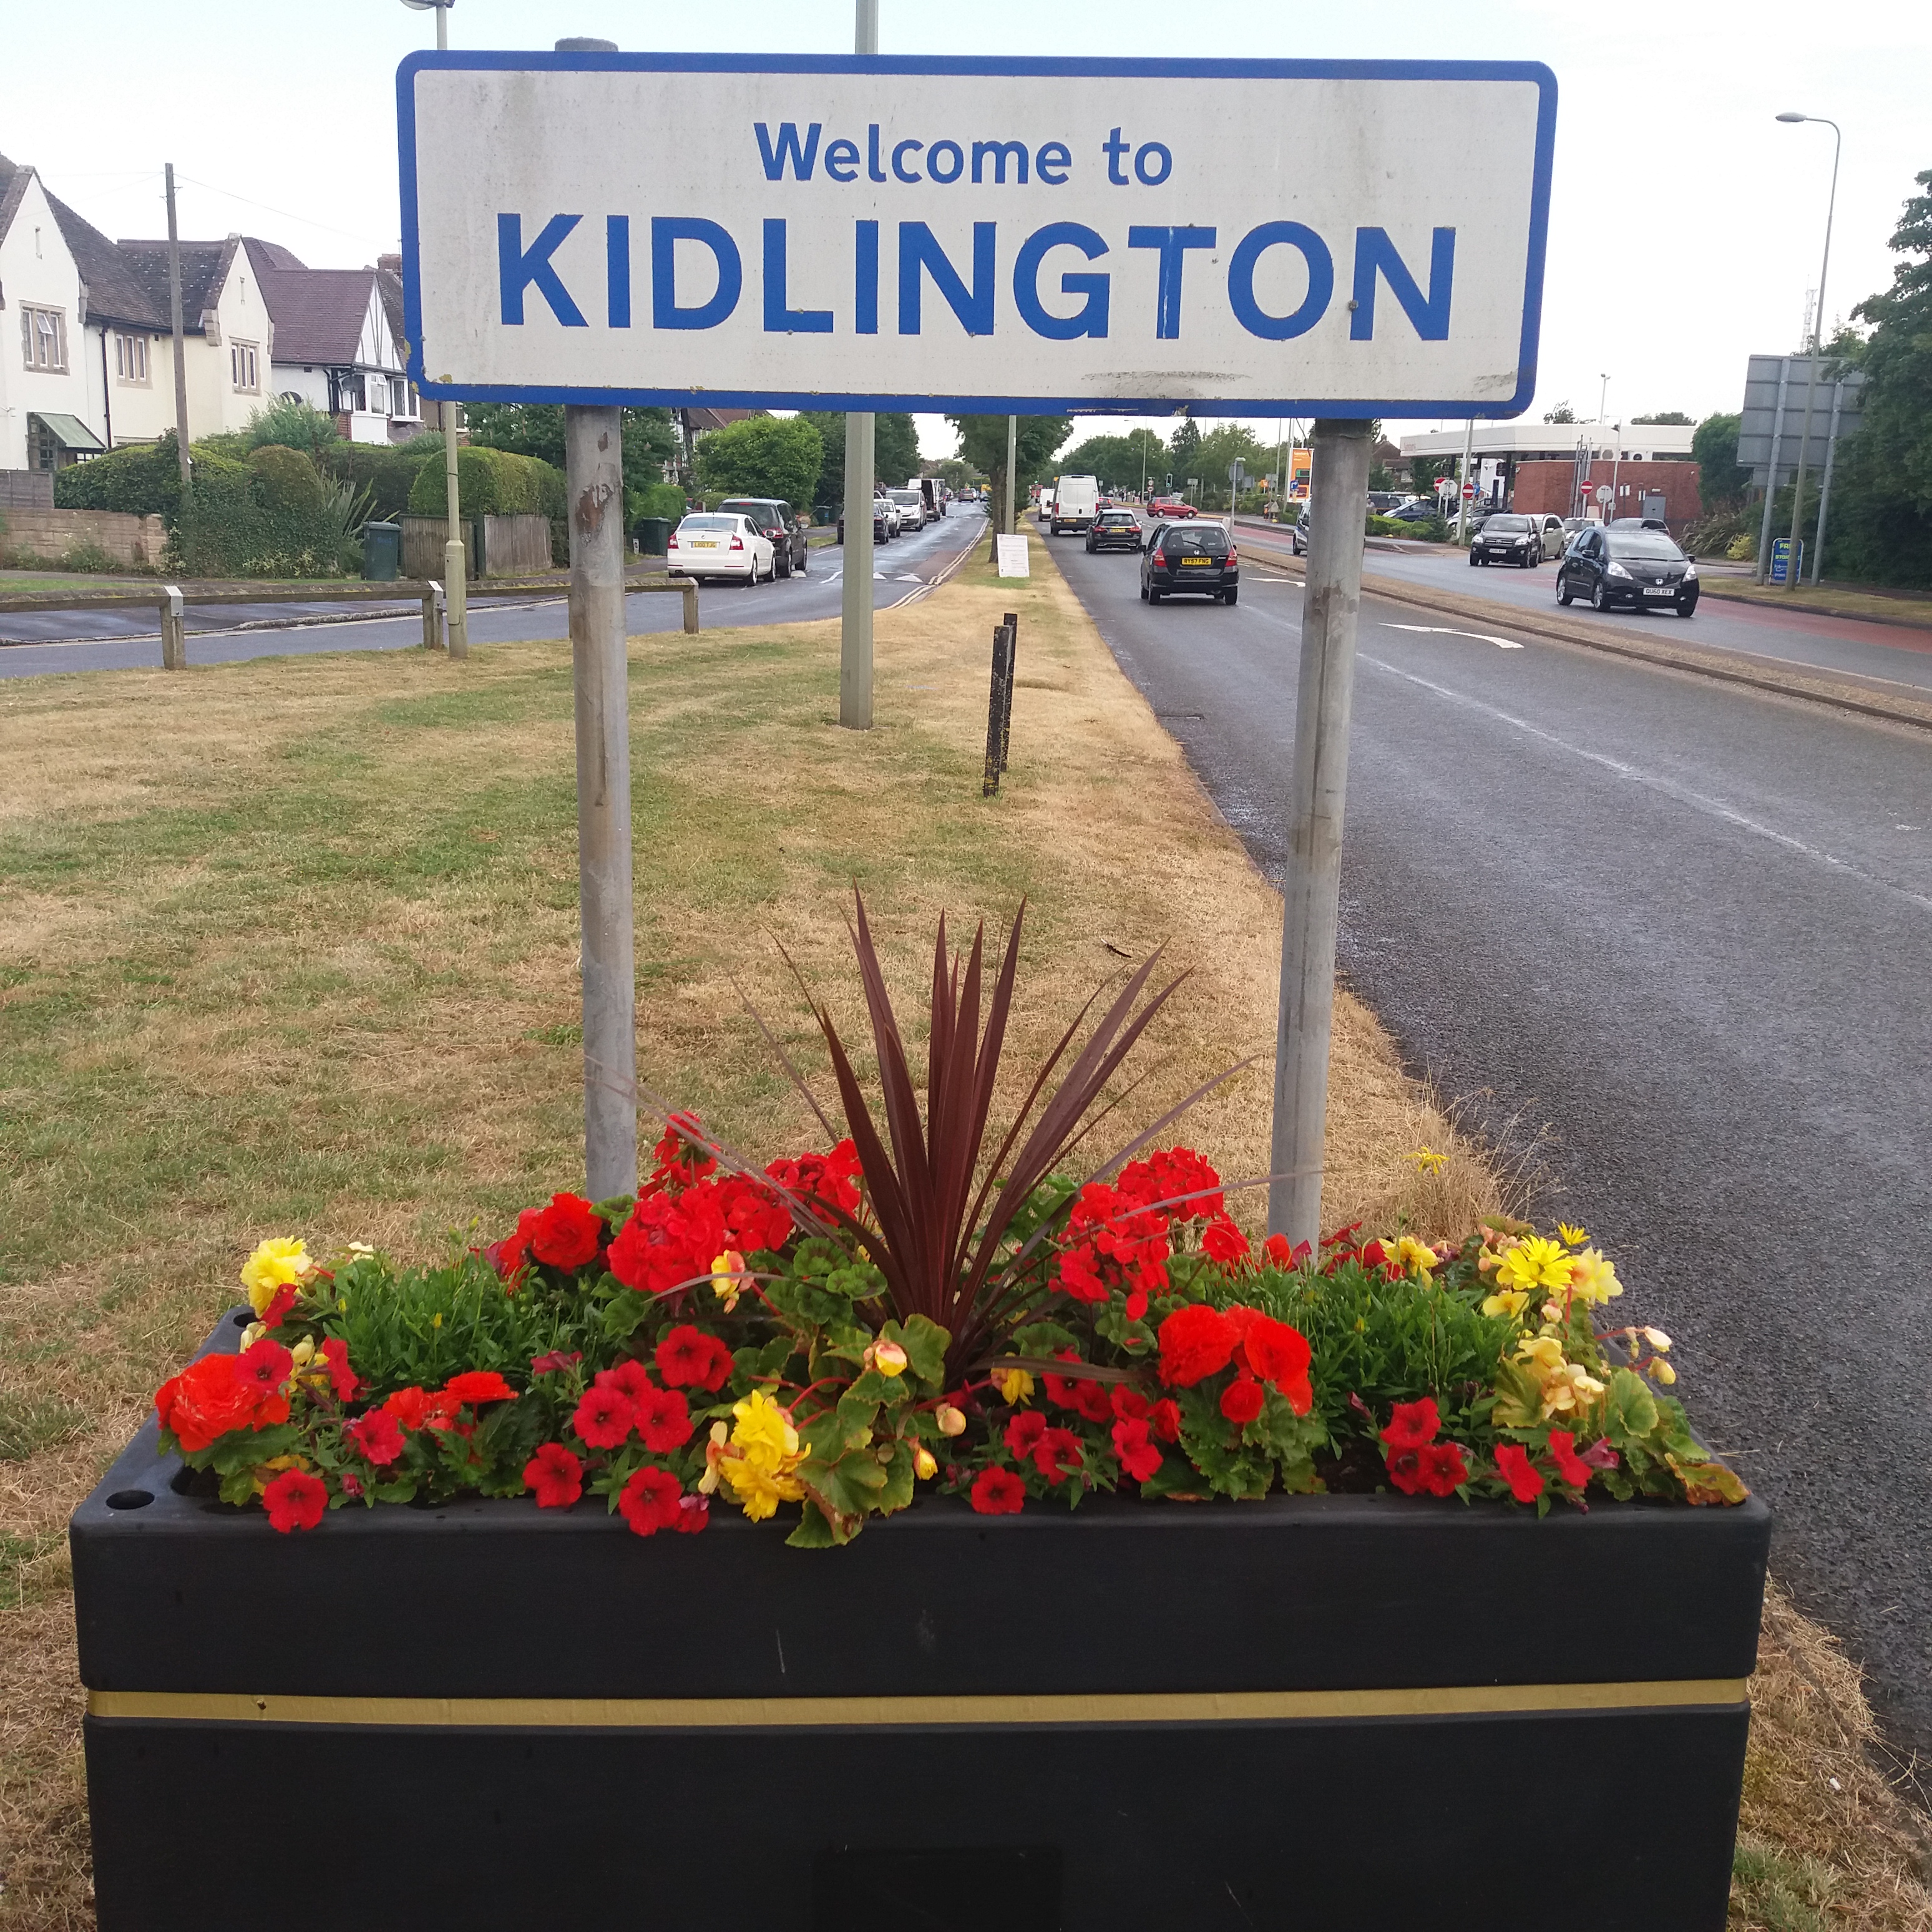 welcome to kidlington sign with flower baskets underneath